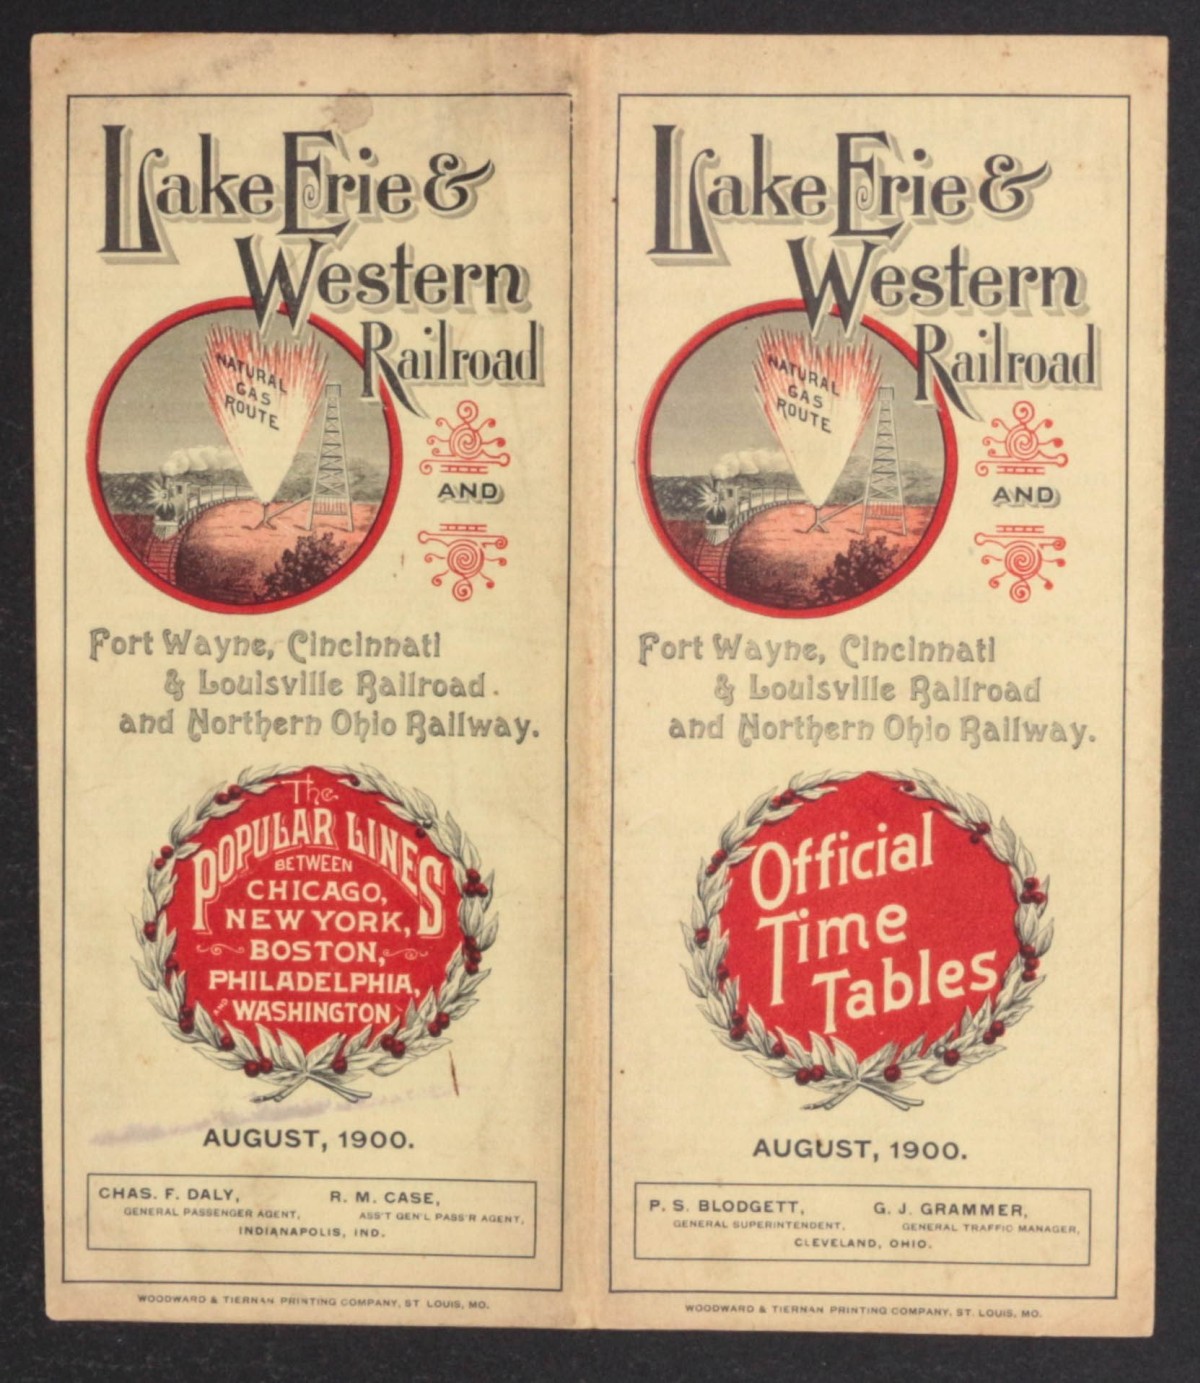 LAKE ERIE & WESTERN RAILROAD TIMETABLE FOR 1900